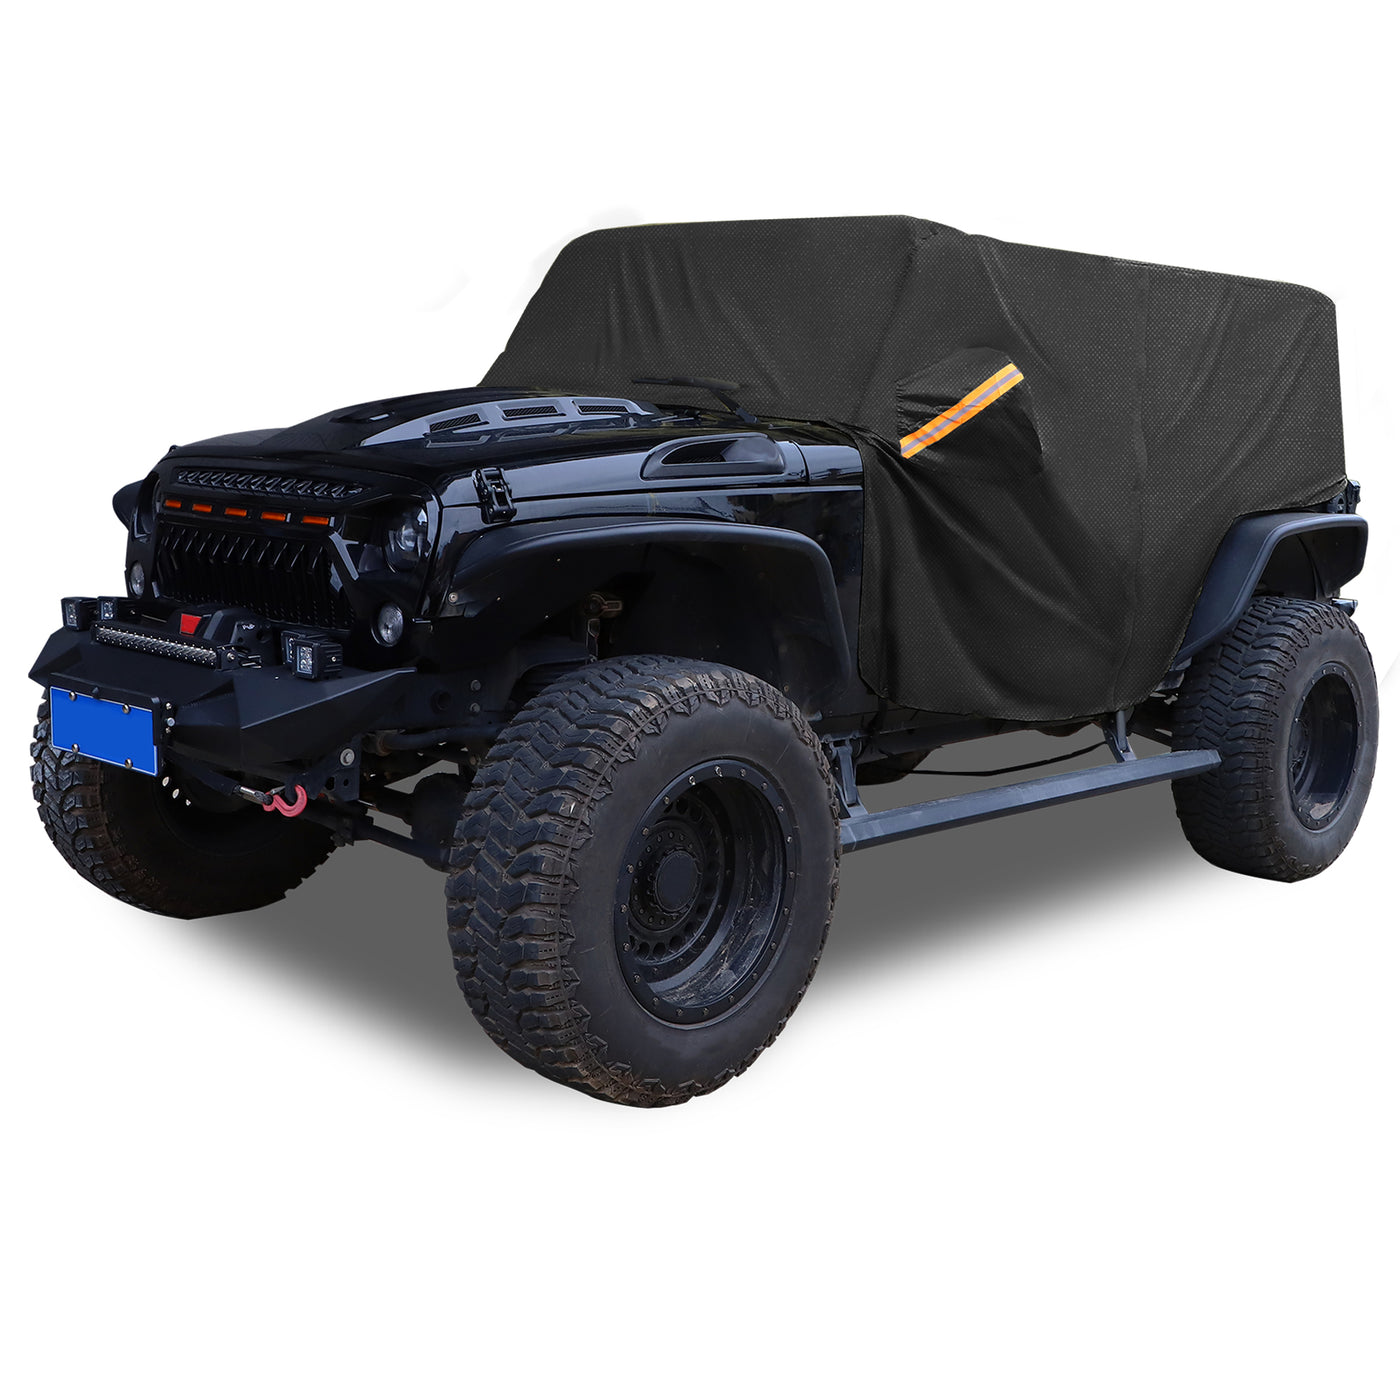 X AUTOHAUX SUV Car Cover Cab Cover for Jeep Wrangler JK JL Hardtop 4 Door 2007-2021 Outdoor Sun Dust Snow Protection 210D Oxford with Driver Door Zipper